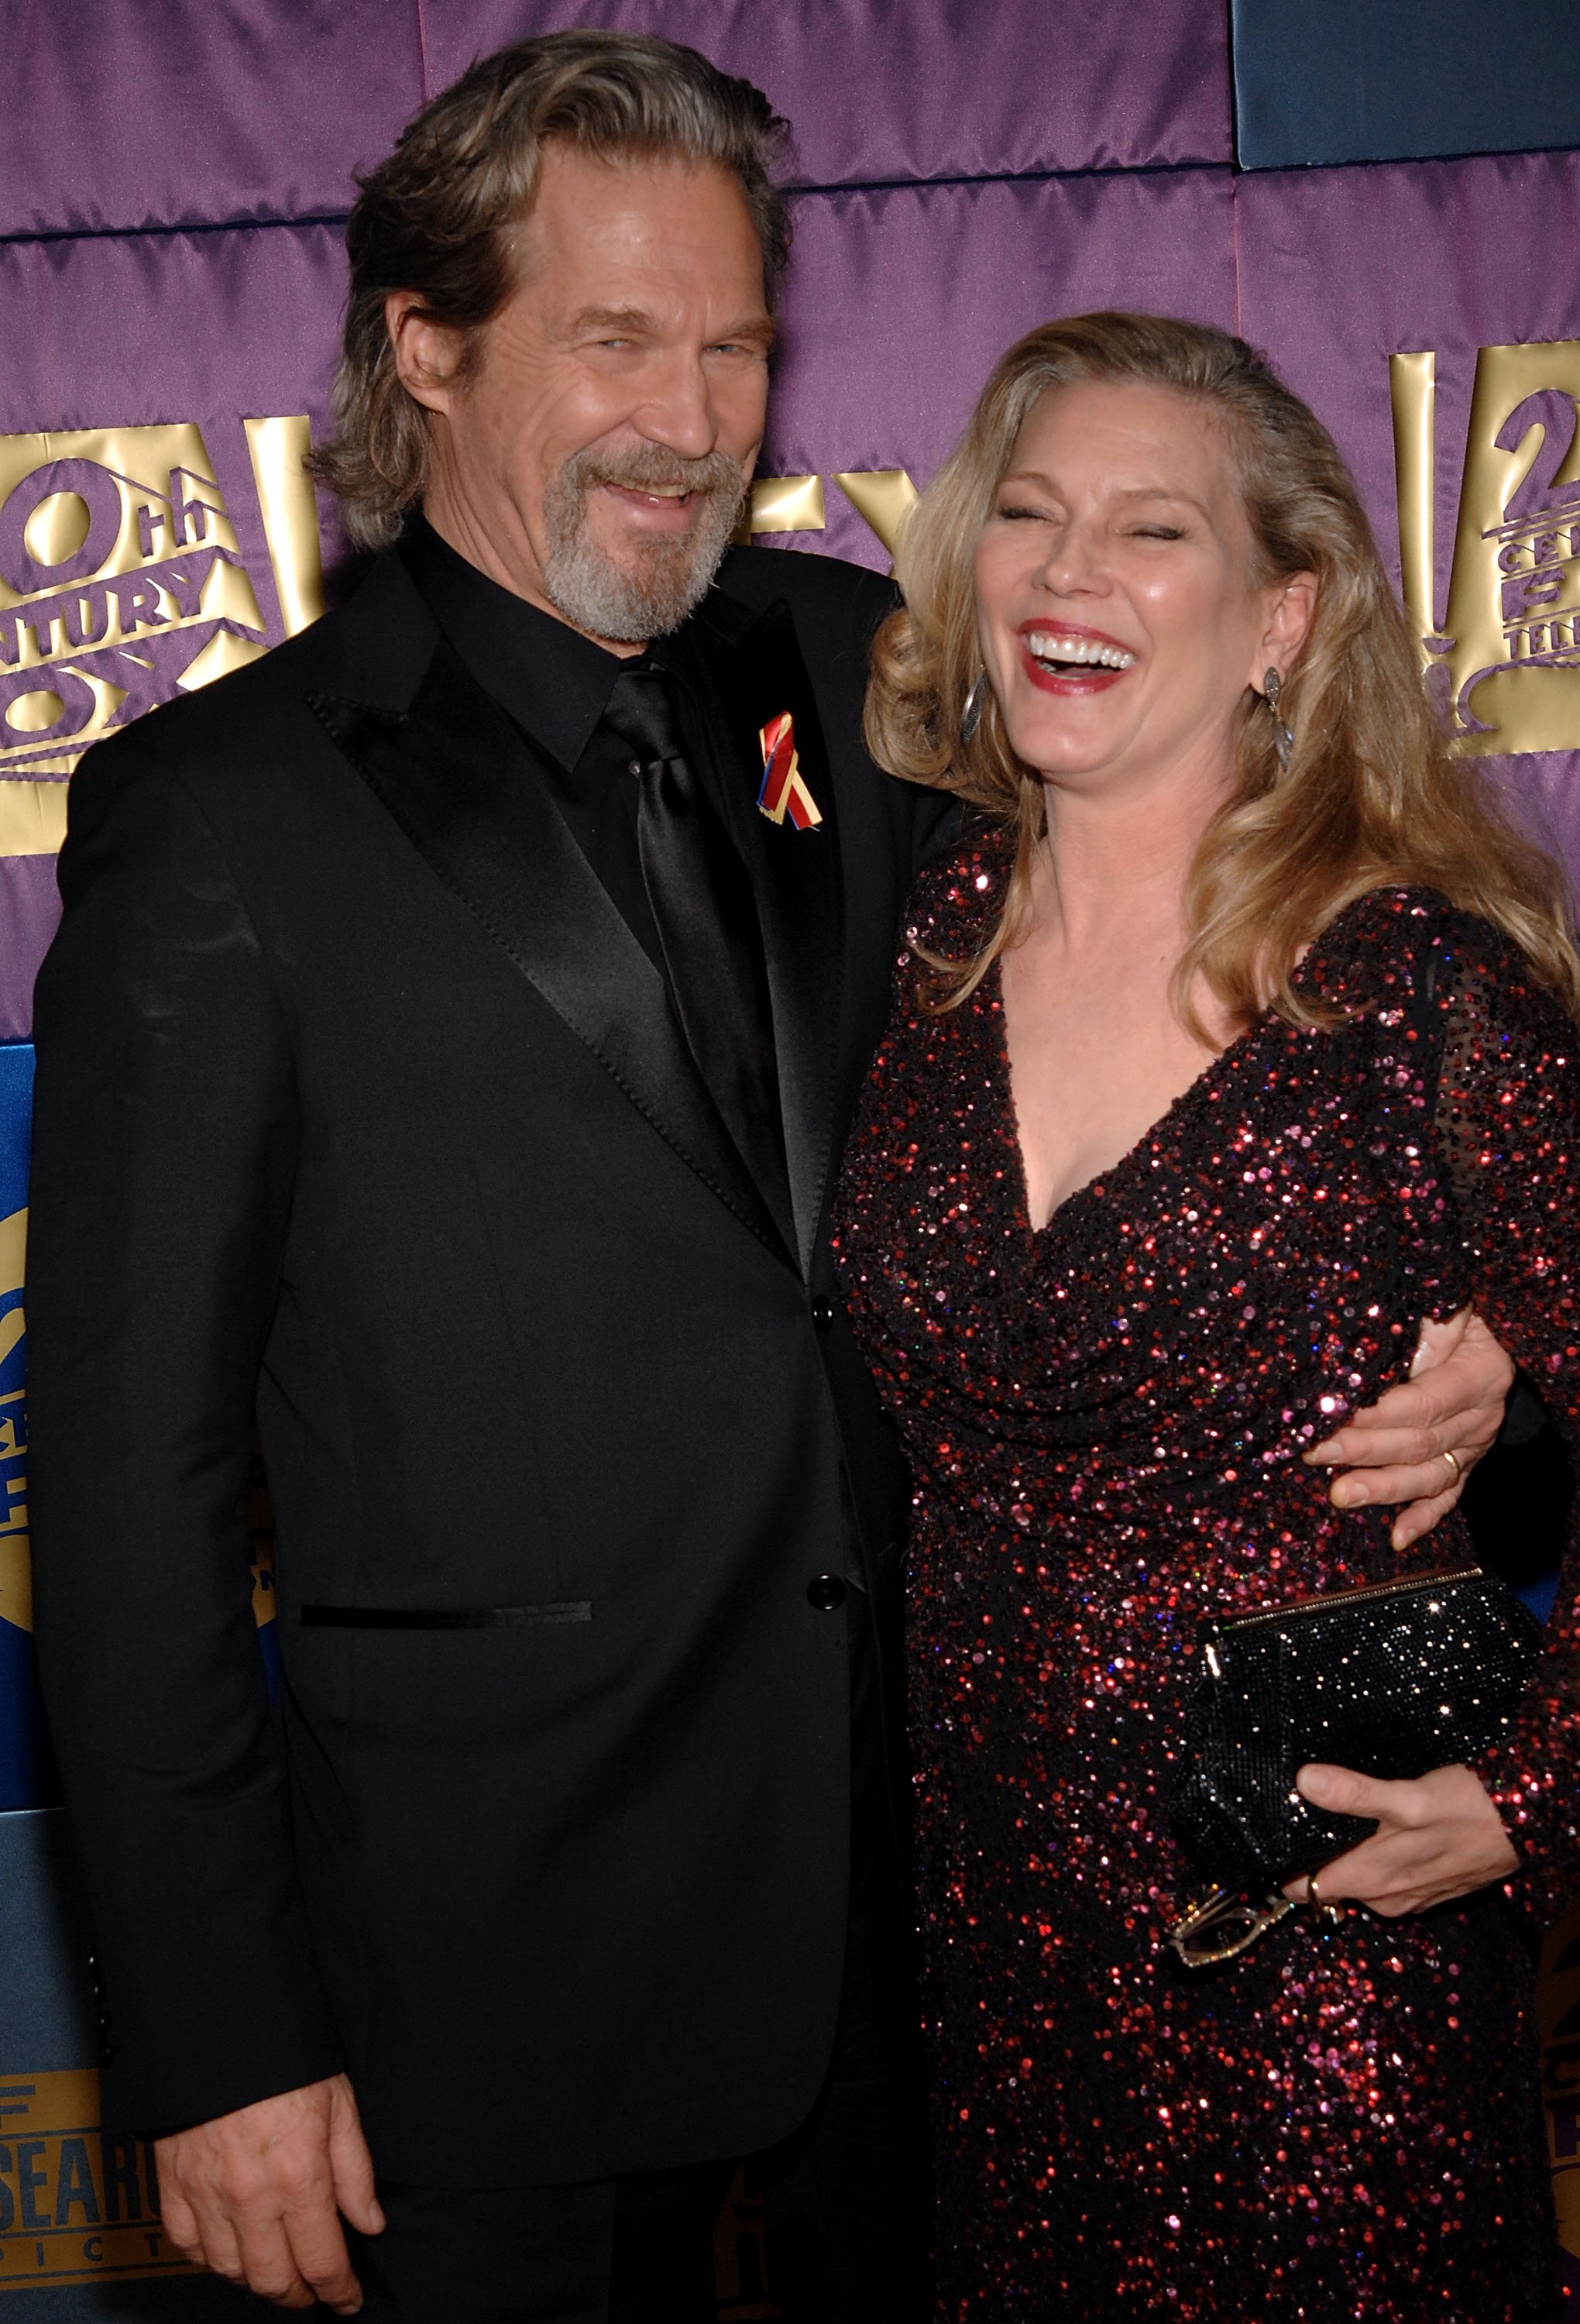 eff Bridges (L) and Susan Geston attend Fox's 2010 Golden Globes Awards Party at Craft on January 17, 2010 in Century City, California | Source: Getty Images 